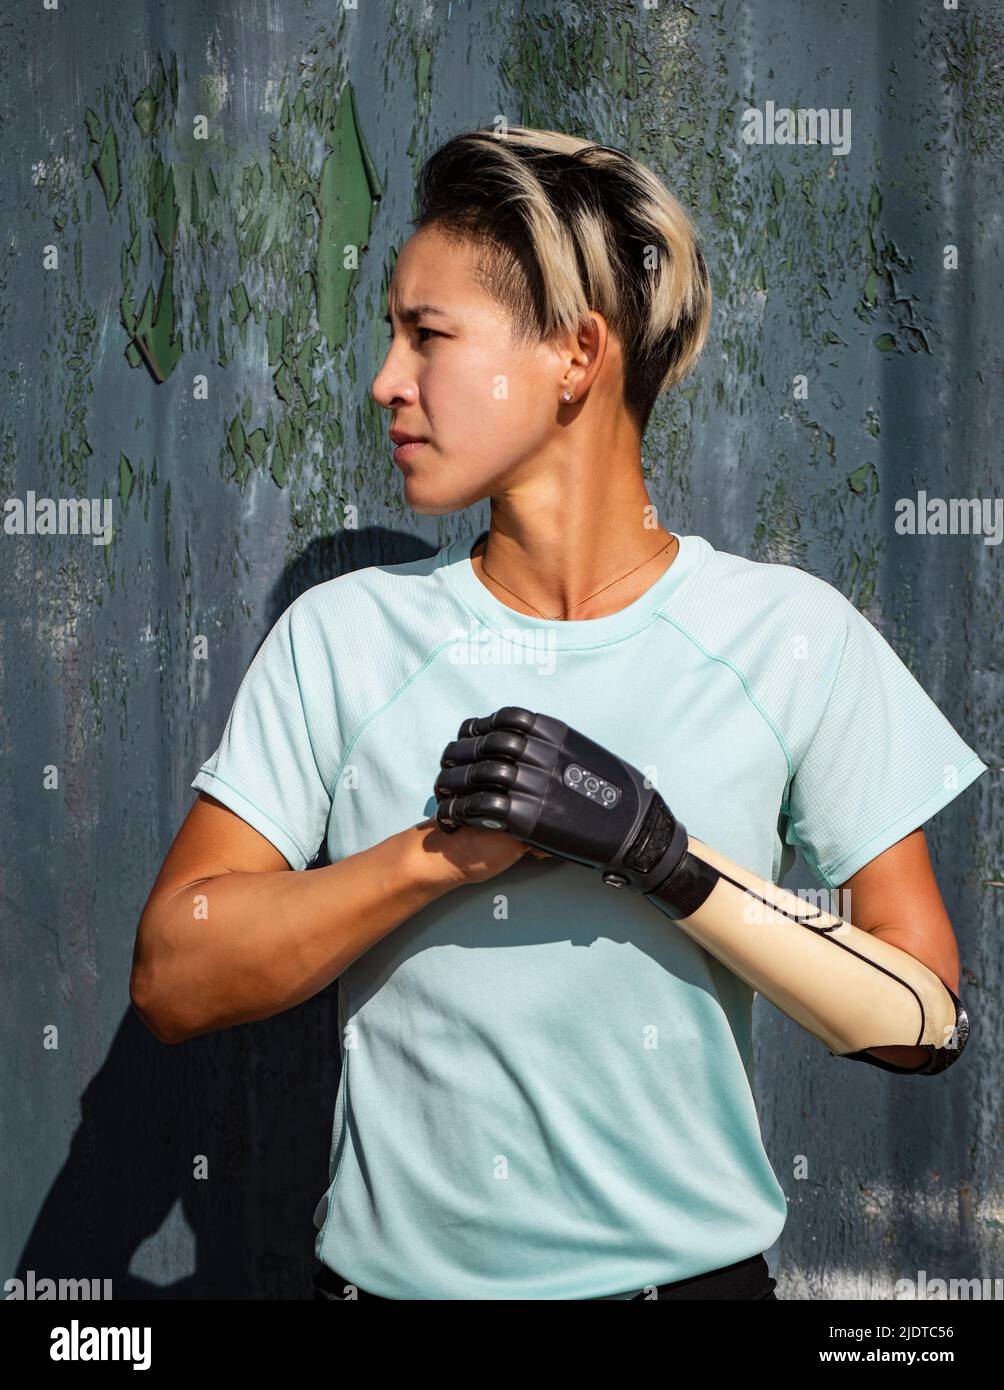 Portrait of athletic woman with prosthetic arm Stock Photo